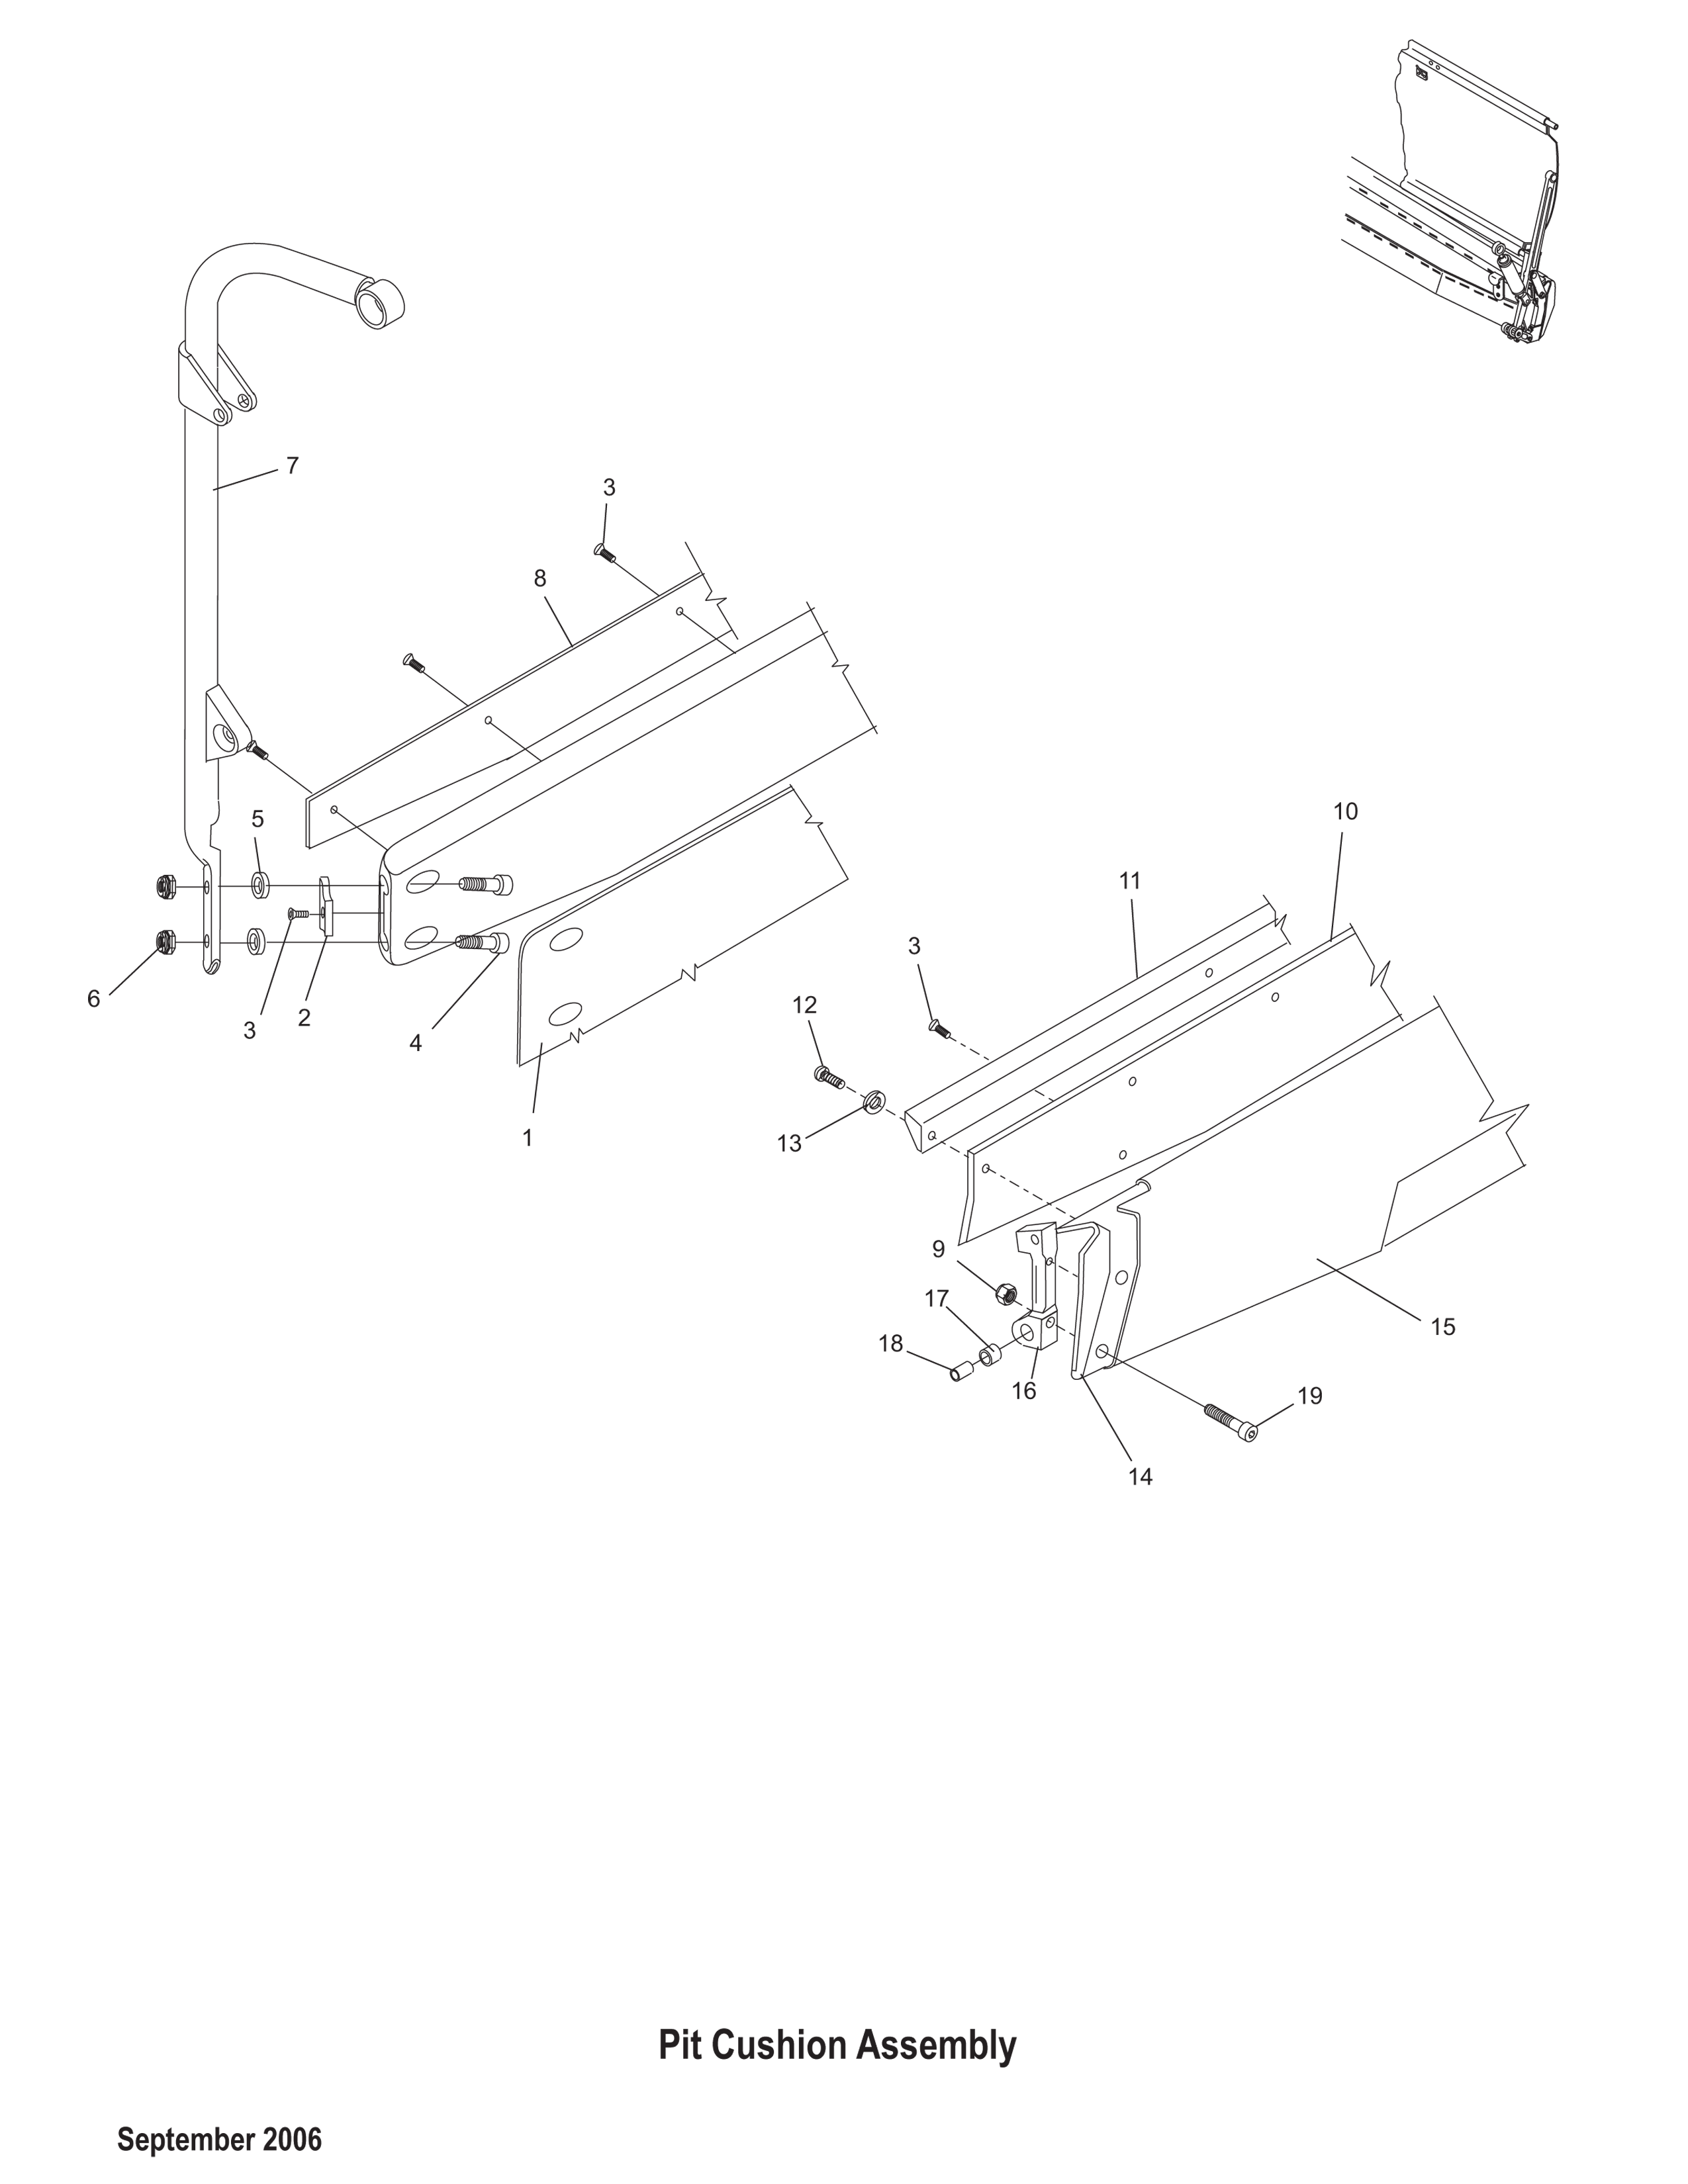 Pit_Cushion_Assembly